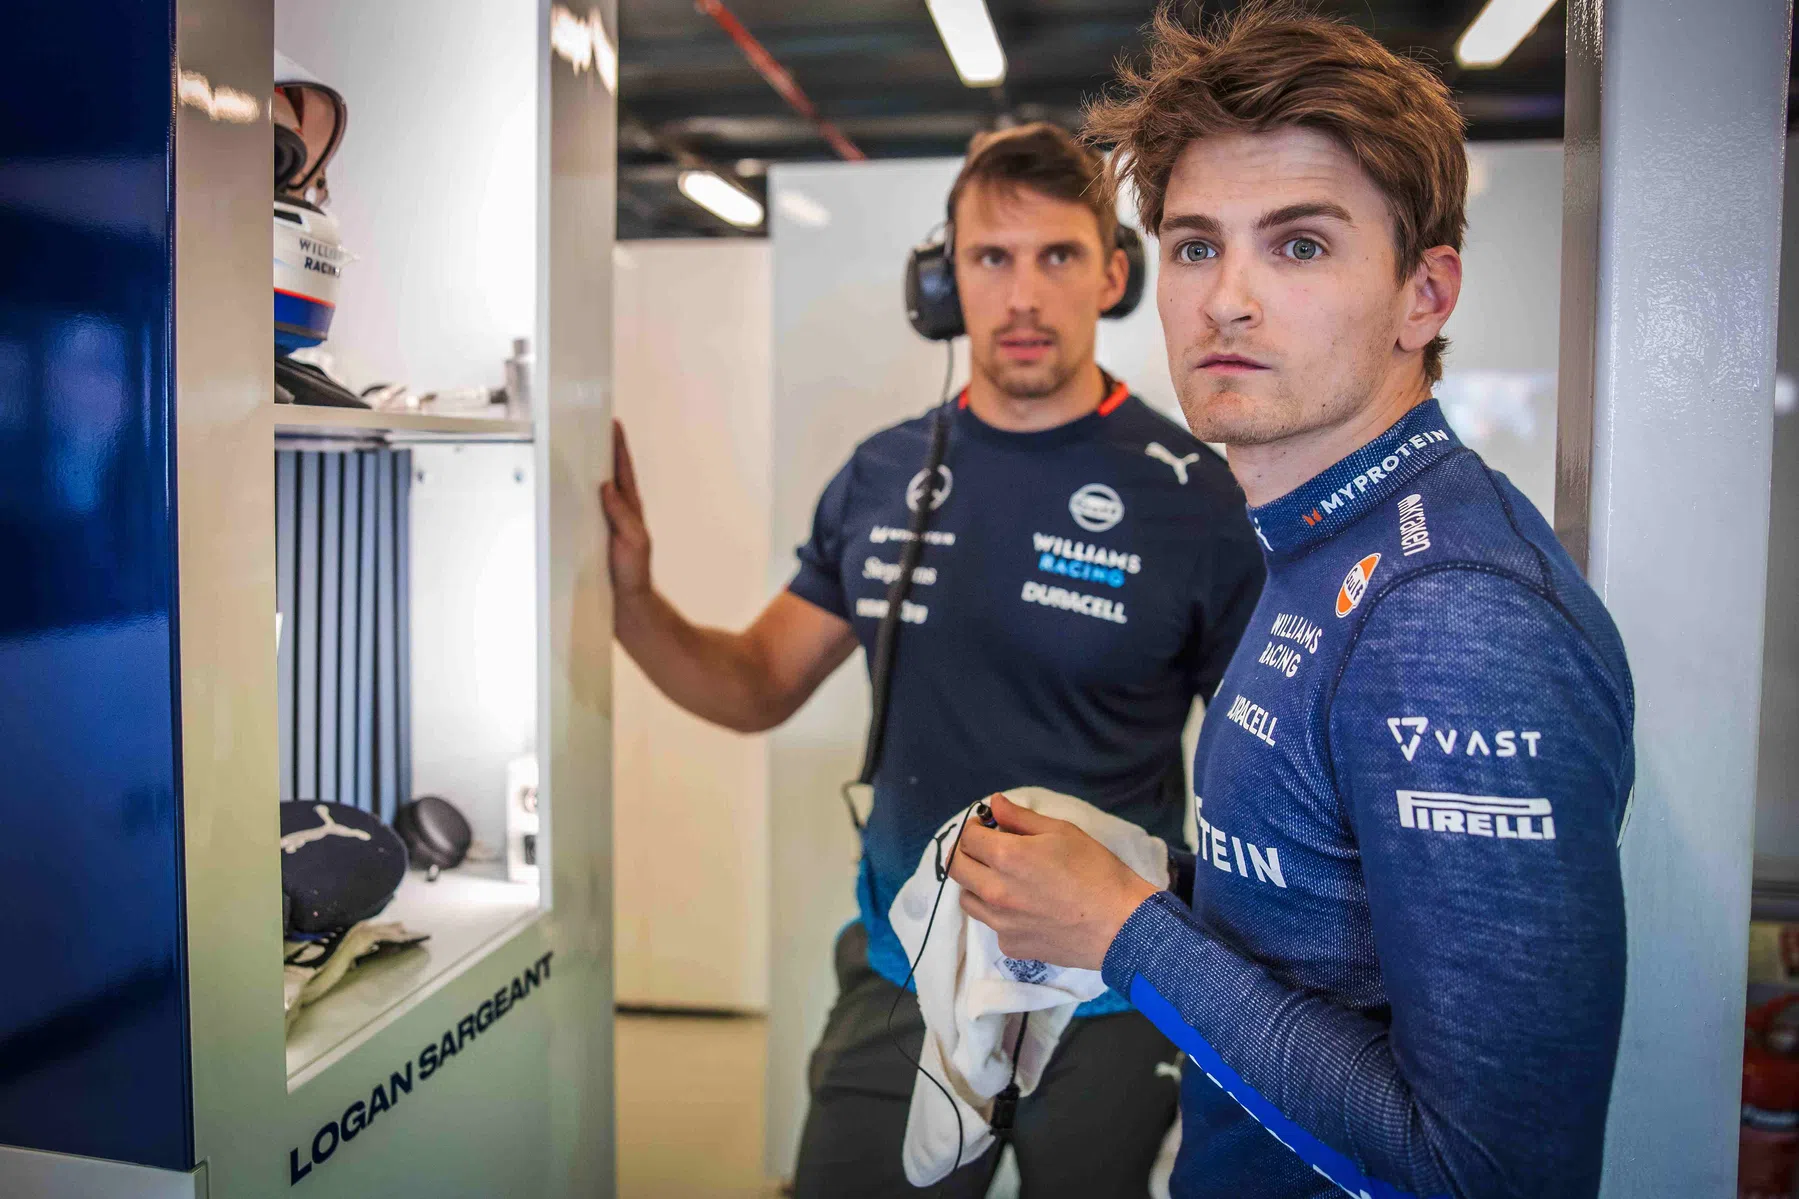 column sargeant to hand in spot at williams